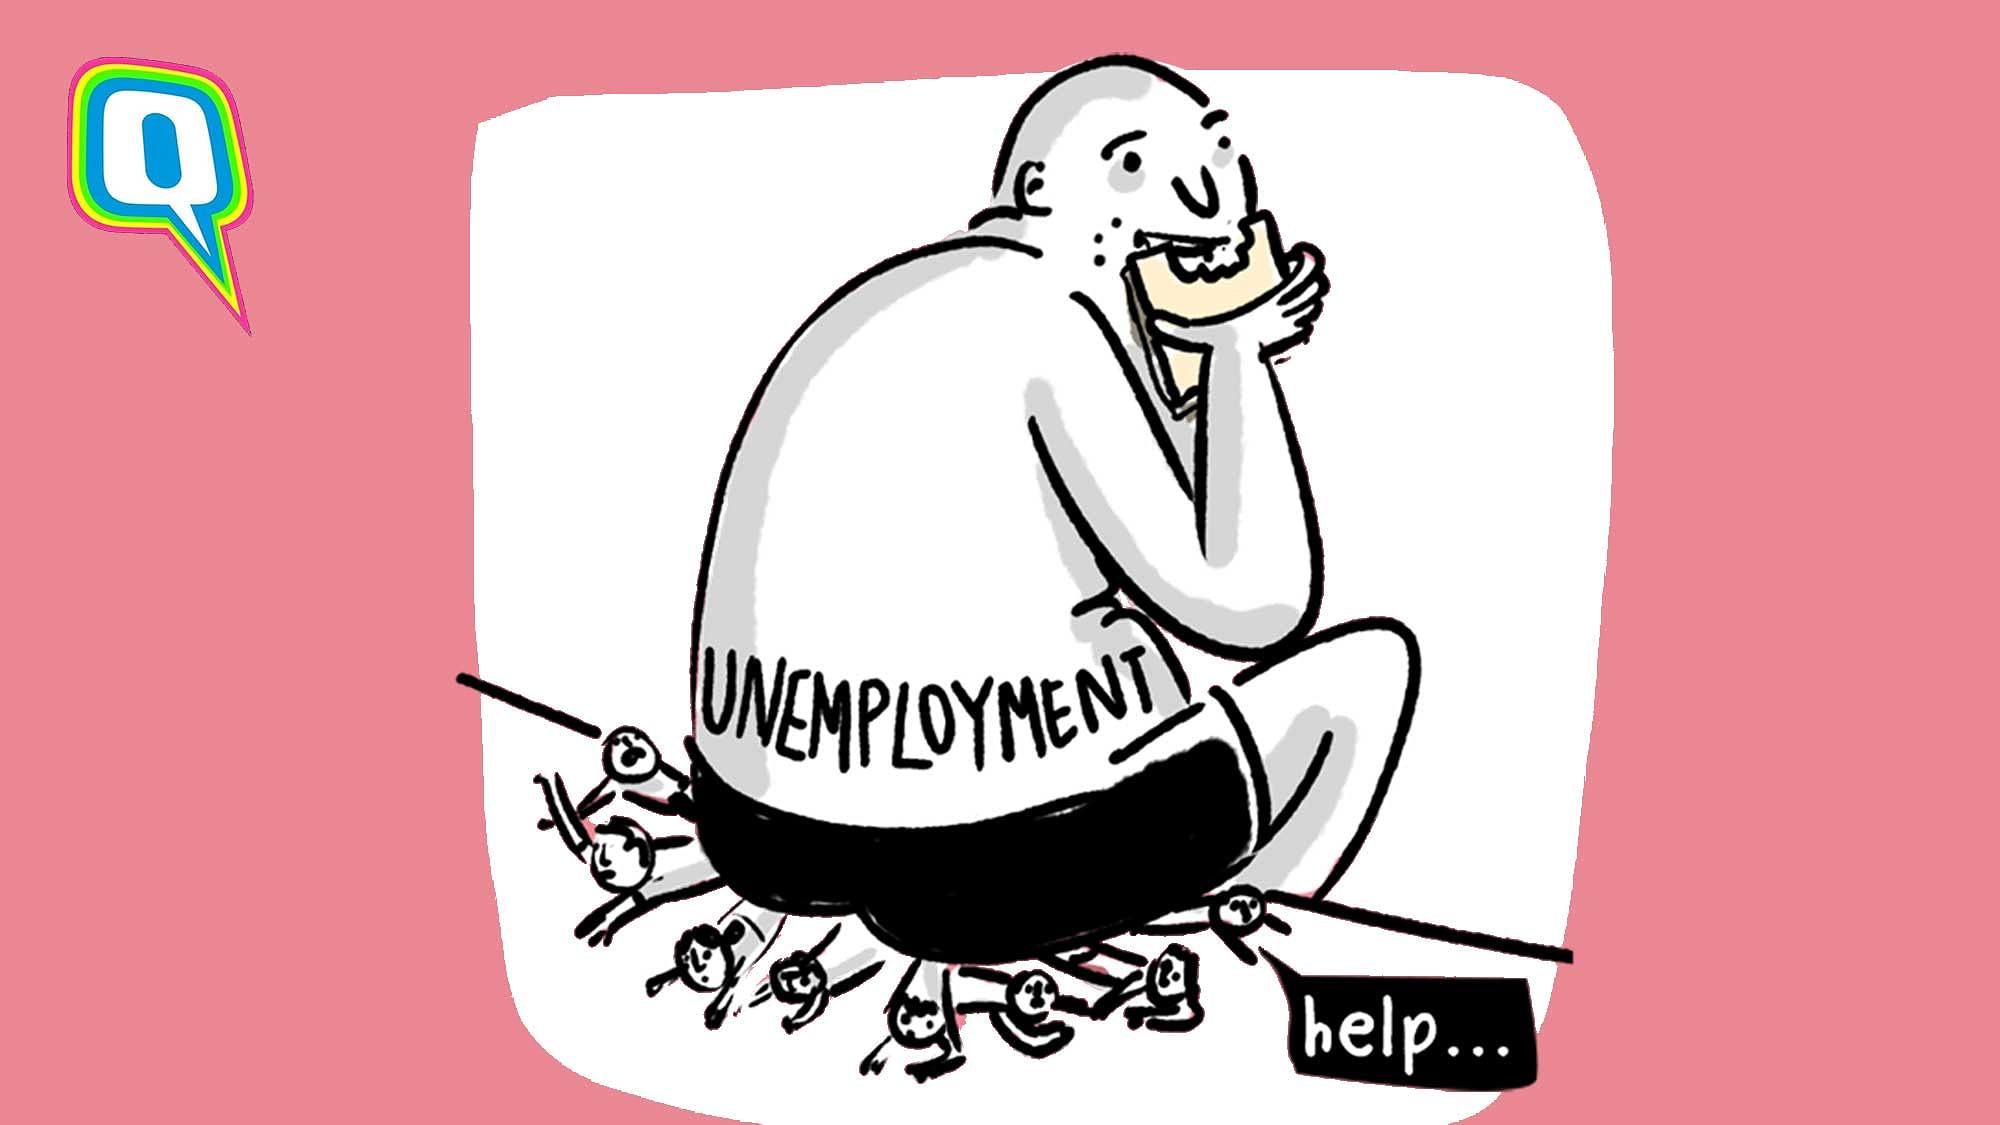 Centre for Monitoring Indian Economy (CMIE) estimates around 2.27 crore Indians to have lost their jobs in the months of April and May.